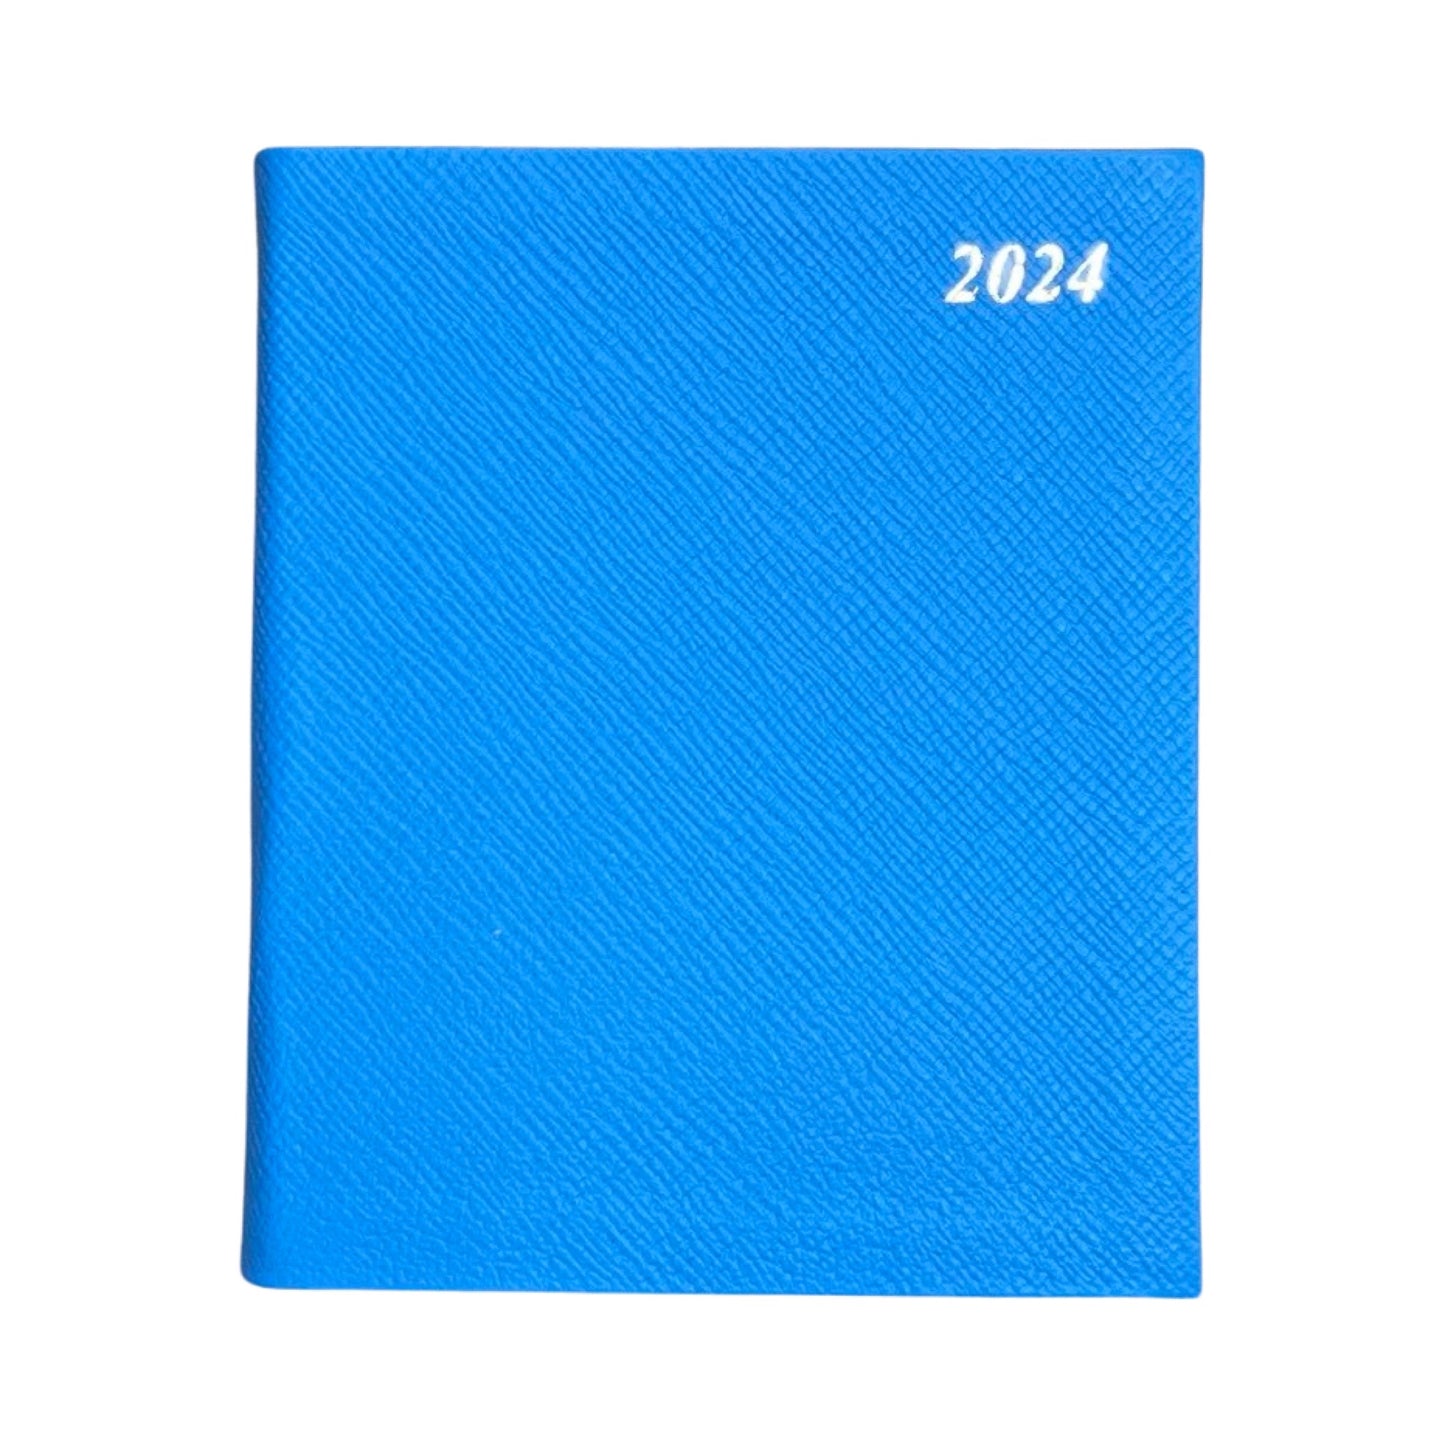 2024 CROSSGRAIN Leather Pocket Calendar Book | 5 x 4" | Thick, One Day Per Page | D154L